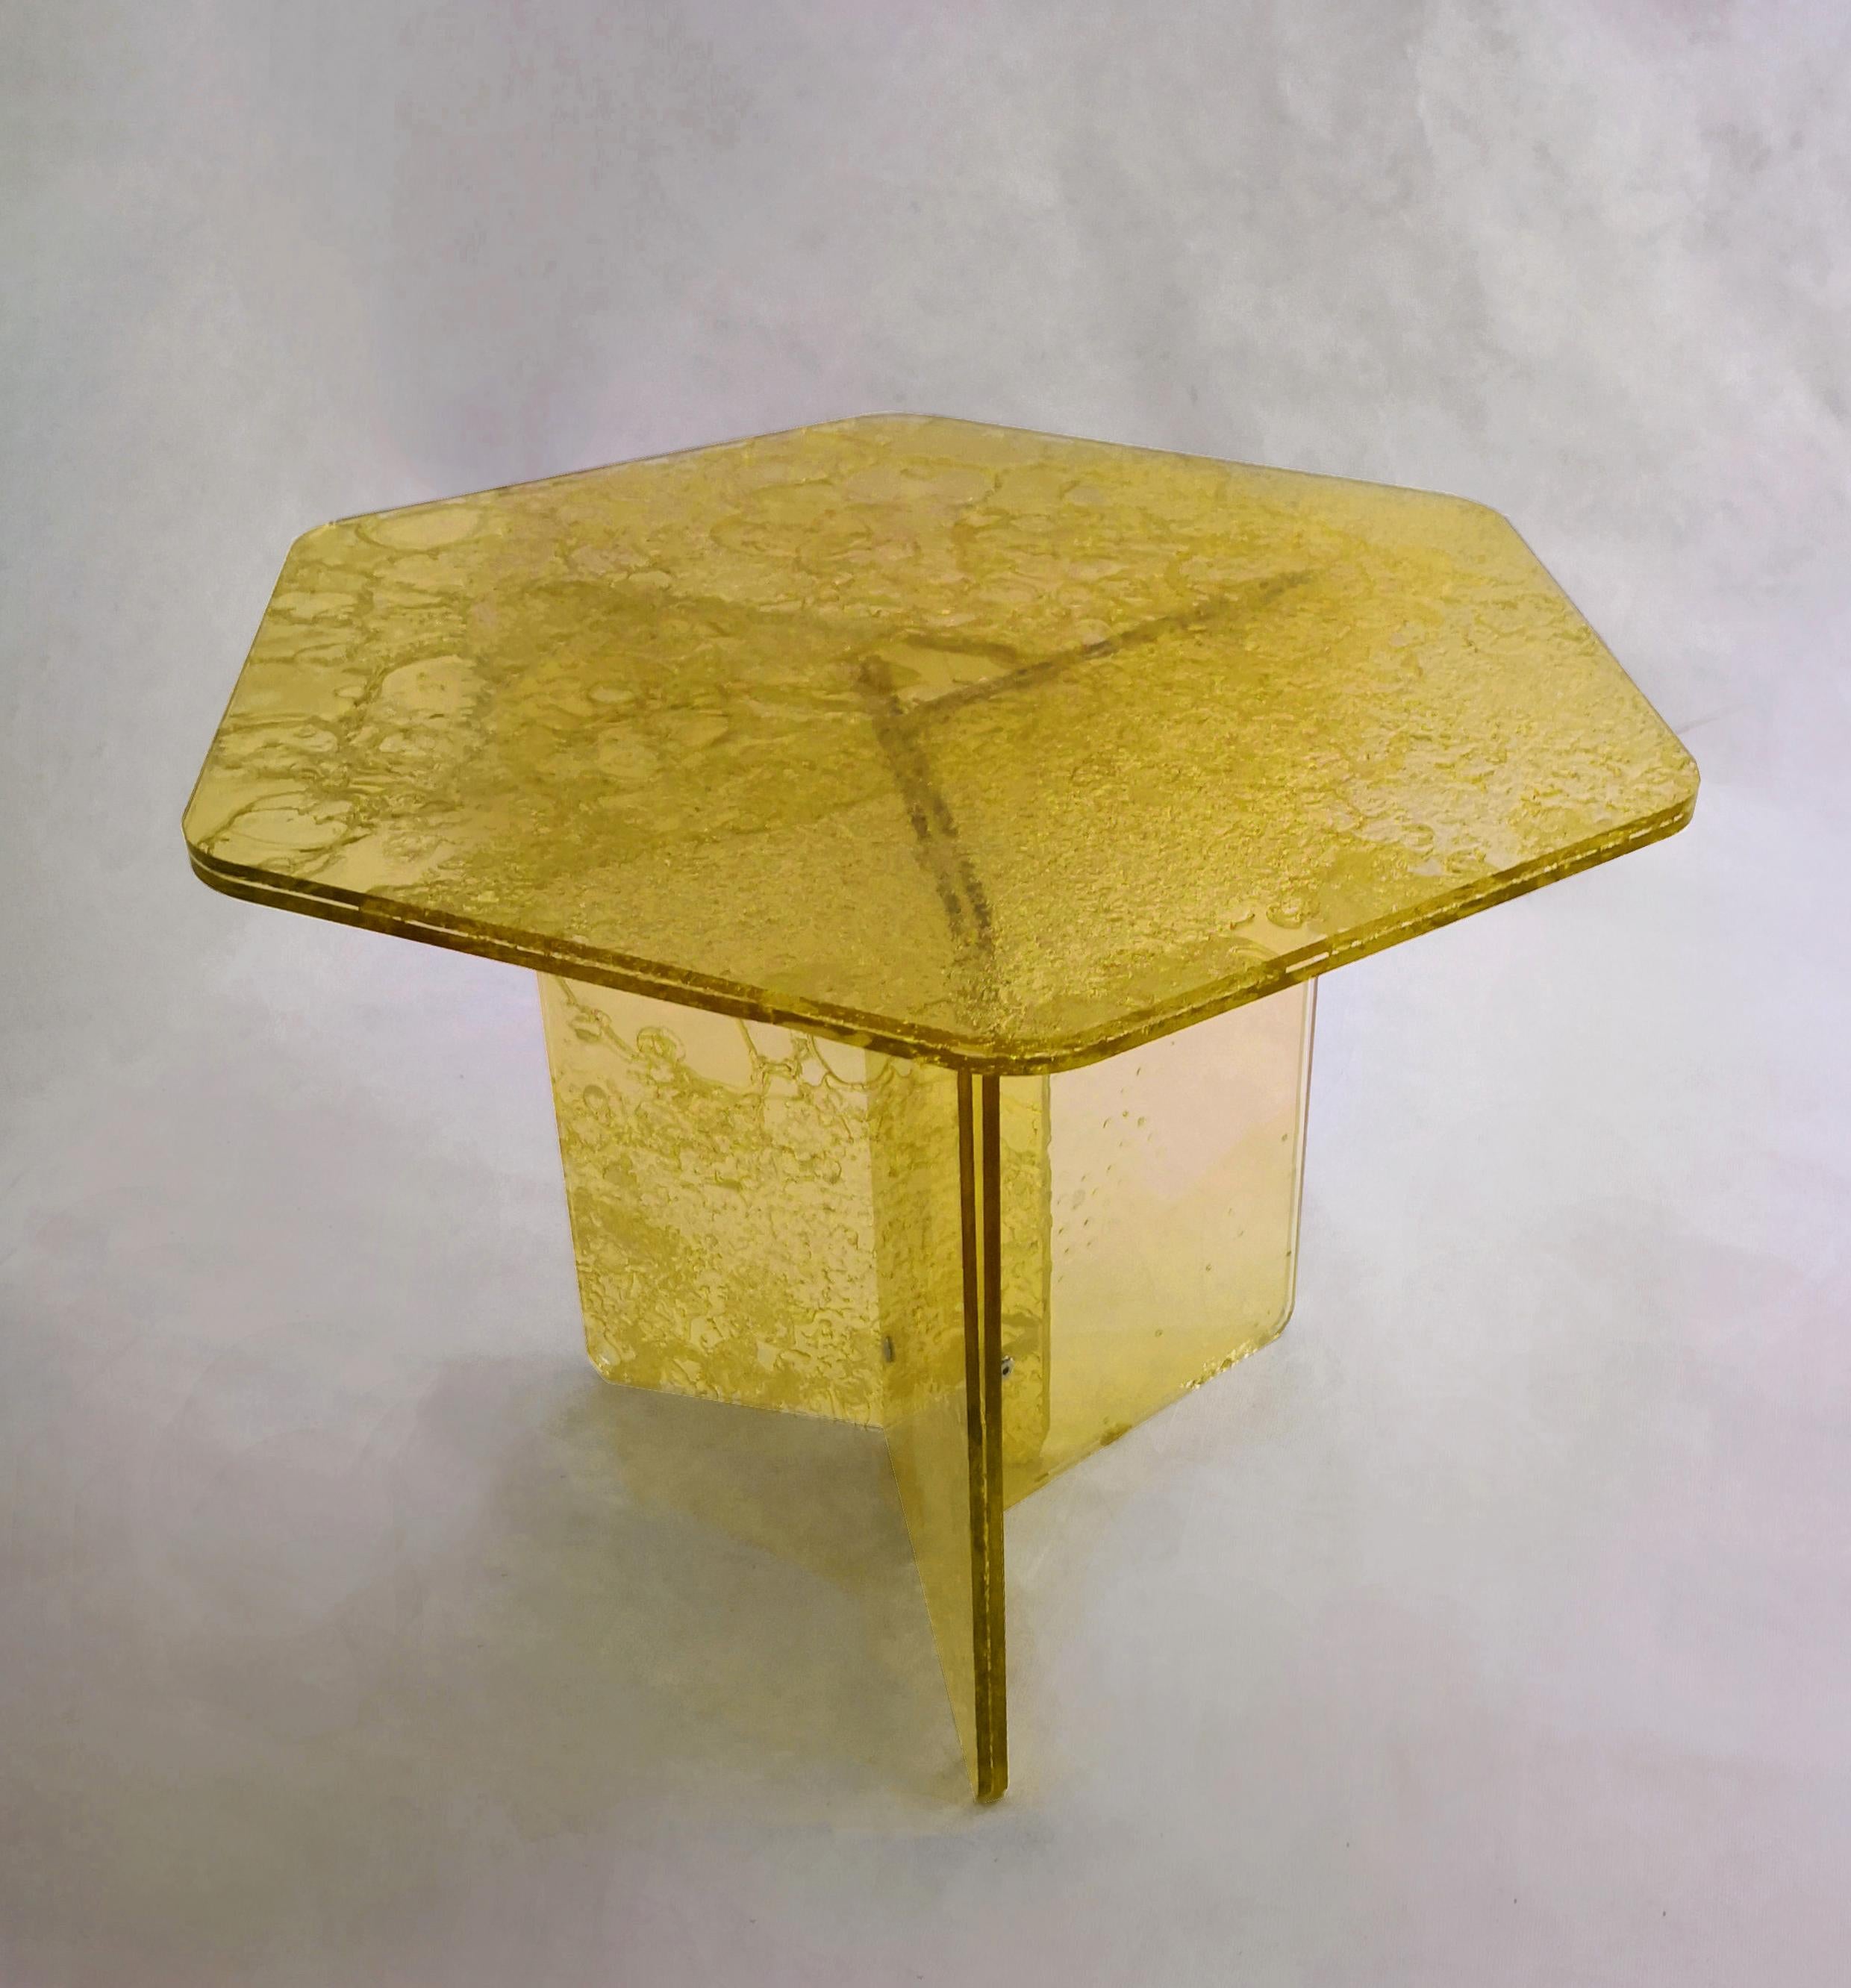 Modern Sketch Hexagon Sidetable Made of Yellow Acrylic Des, Roberto Giacomucci in 2020 For Sale